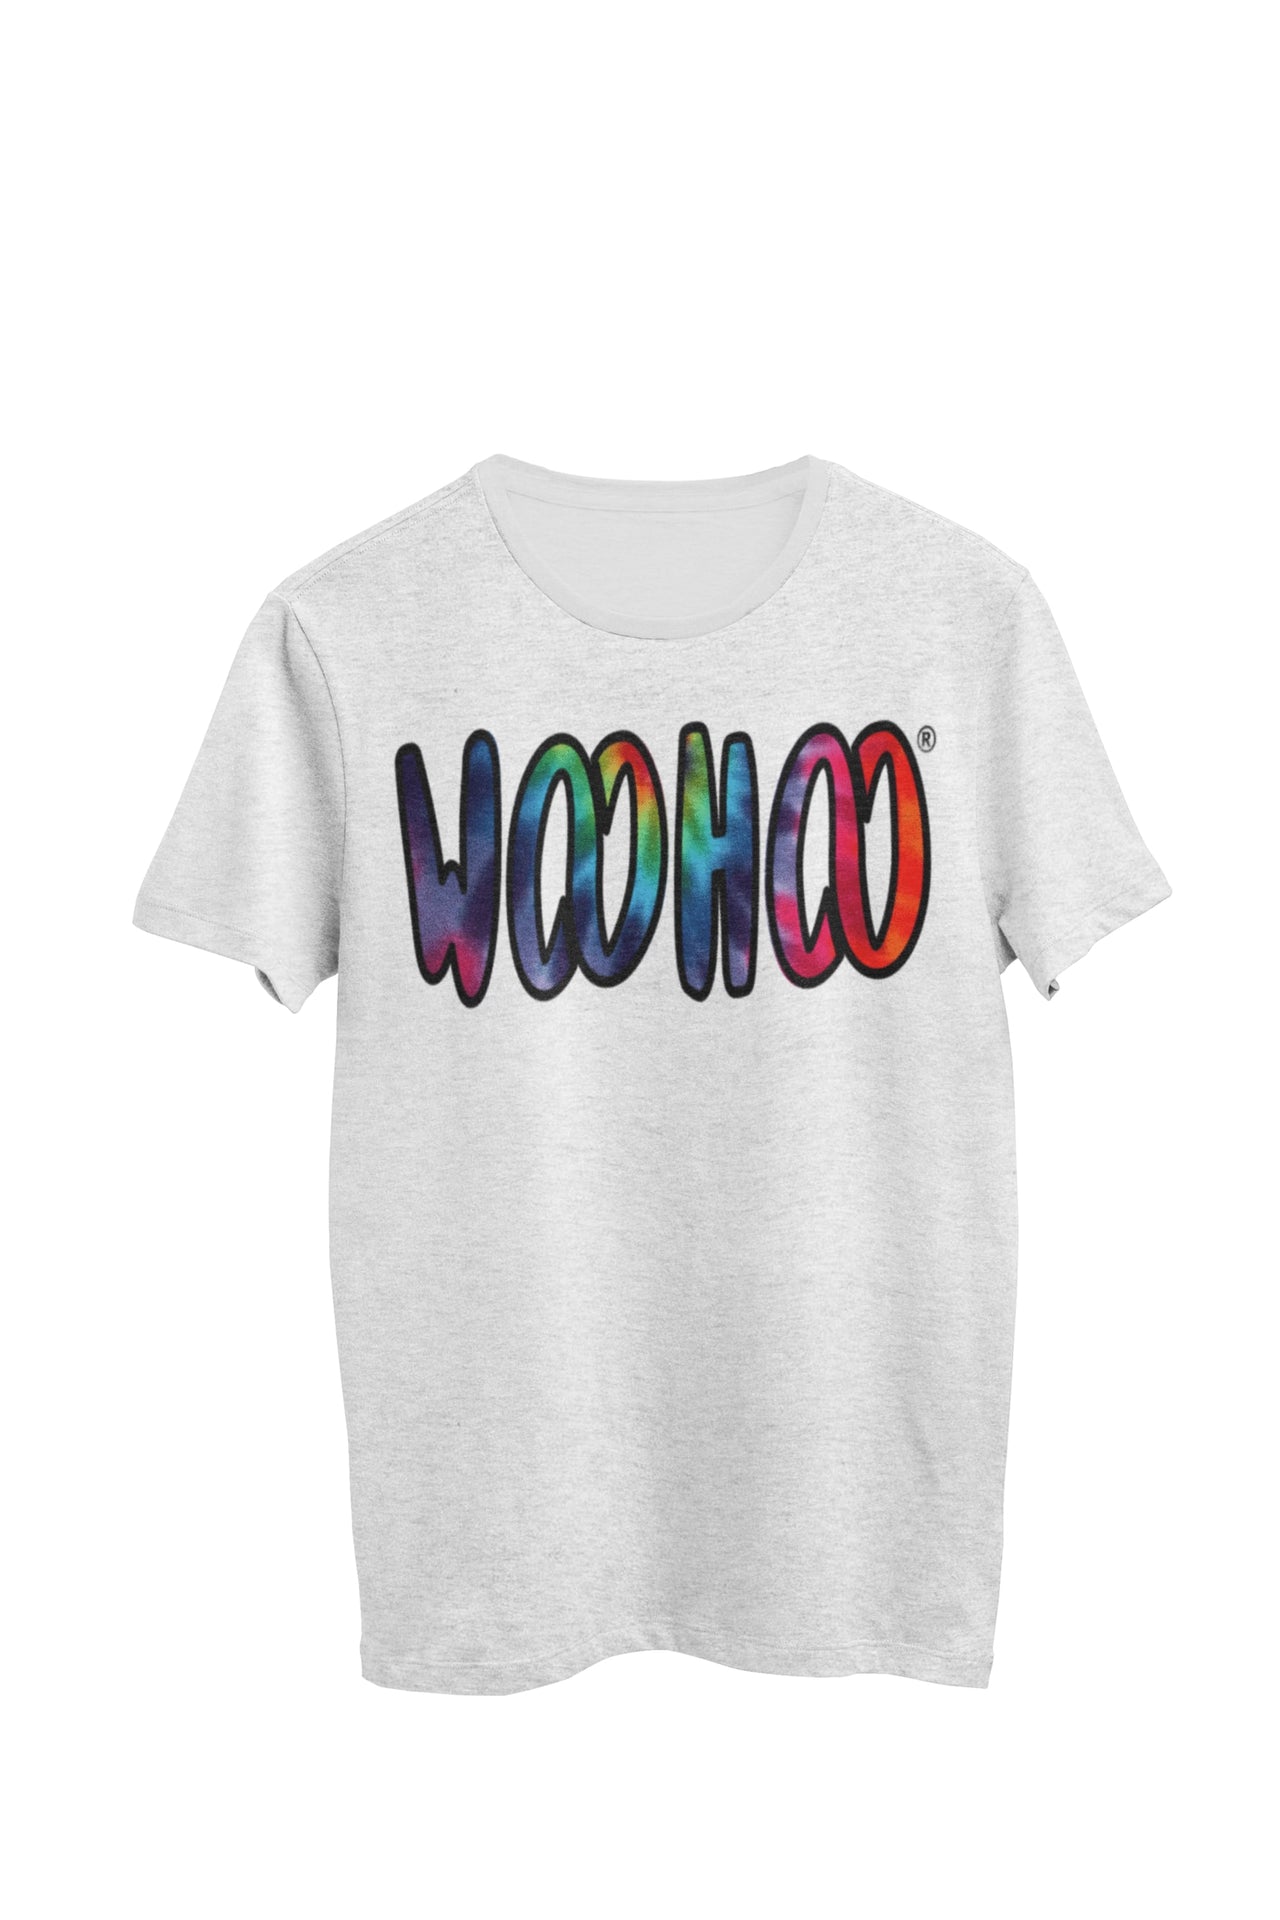 Heather gray unisex t-shirt designed by WooHoo Apparel. The design features a larger 'woohoo' font with tie-dye inside the outline, called Illusion.